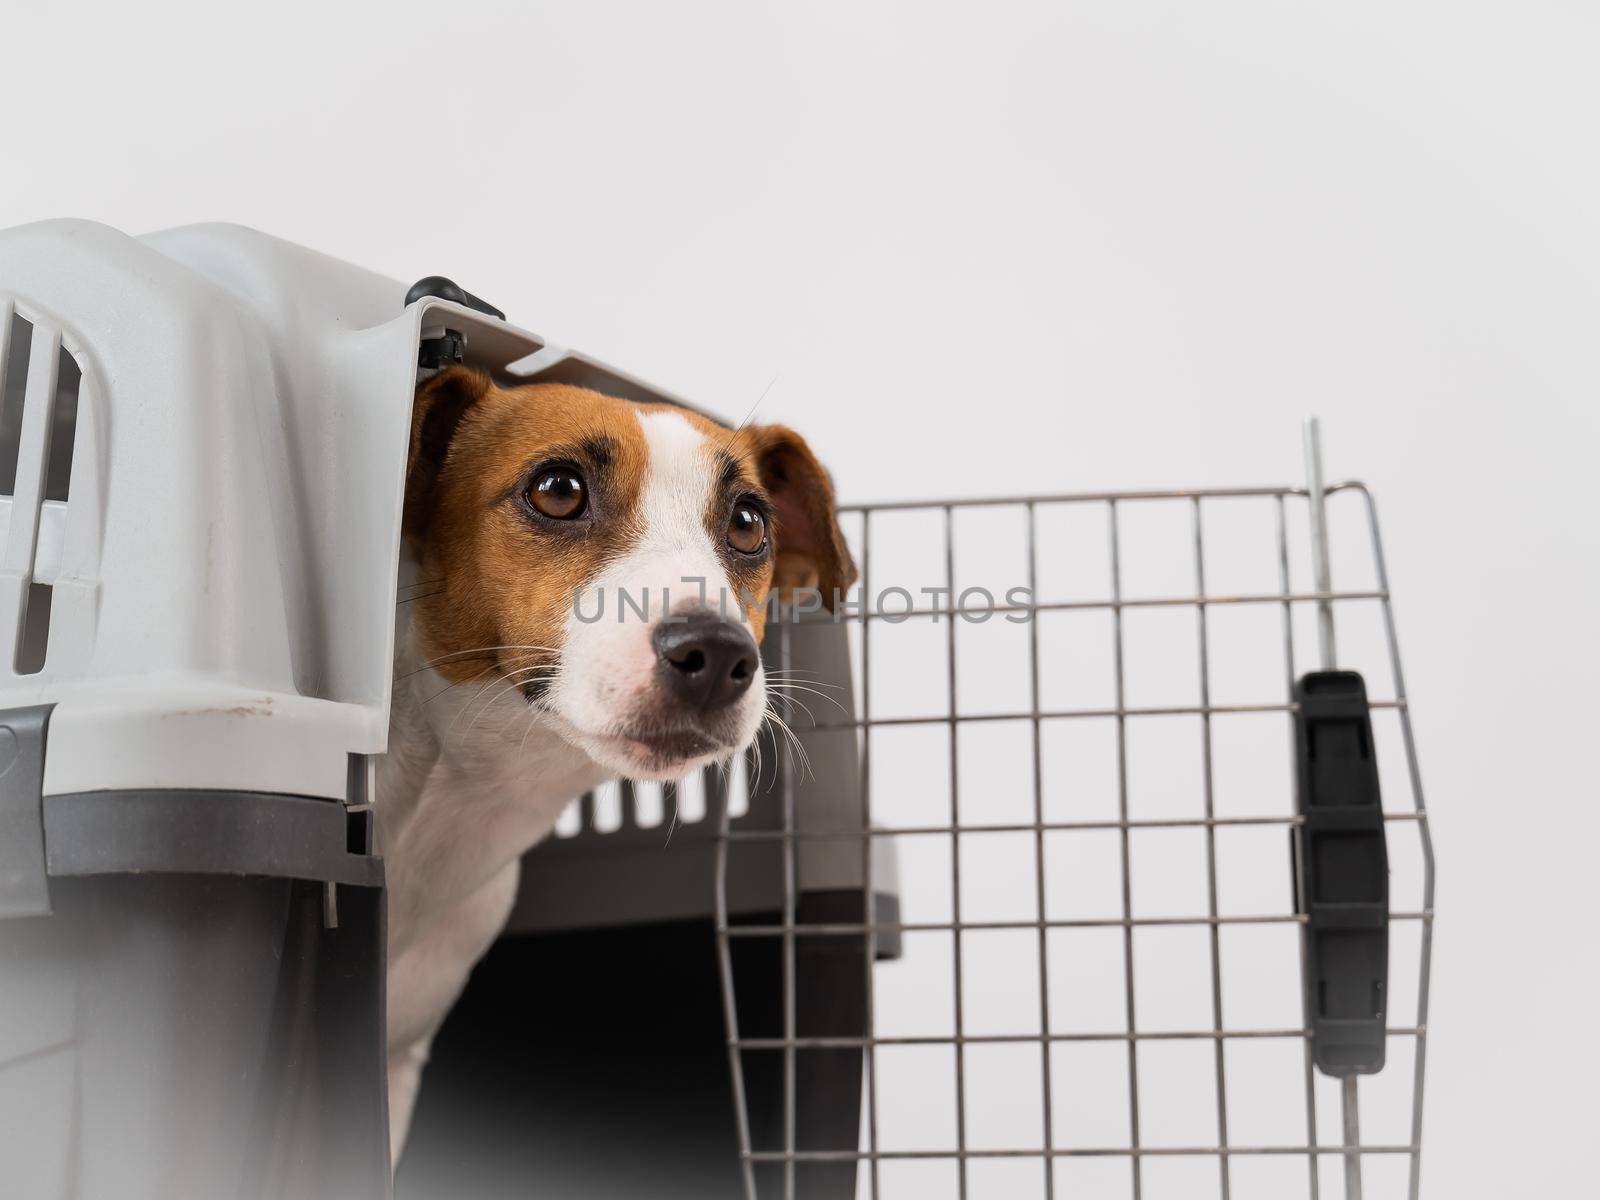 Jack Russell Terrier dog peeking out of travel cage. by mrwed54